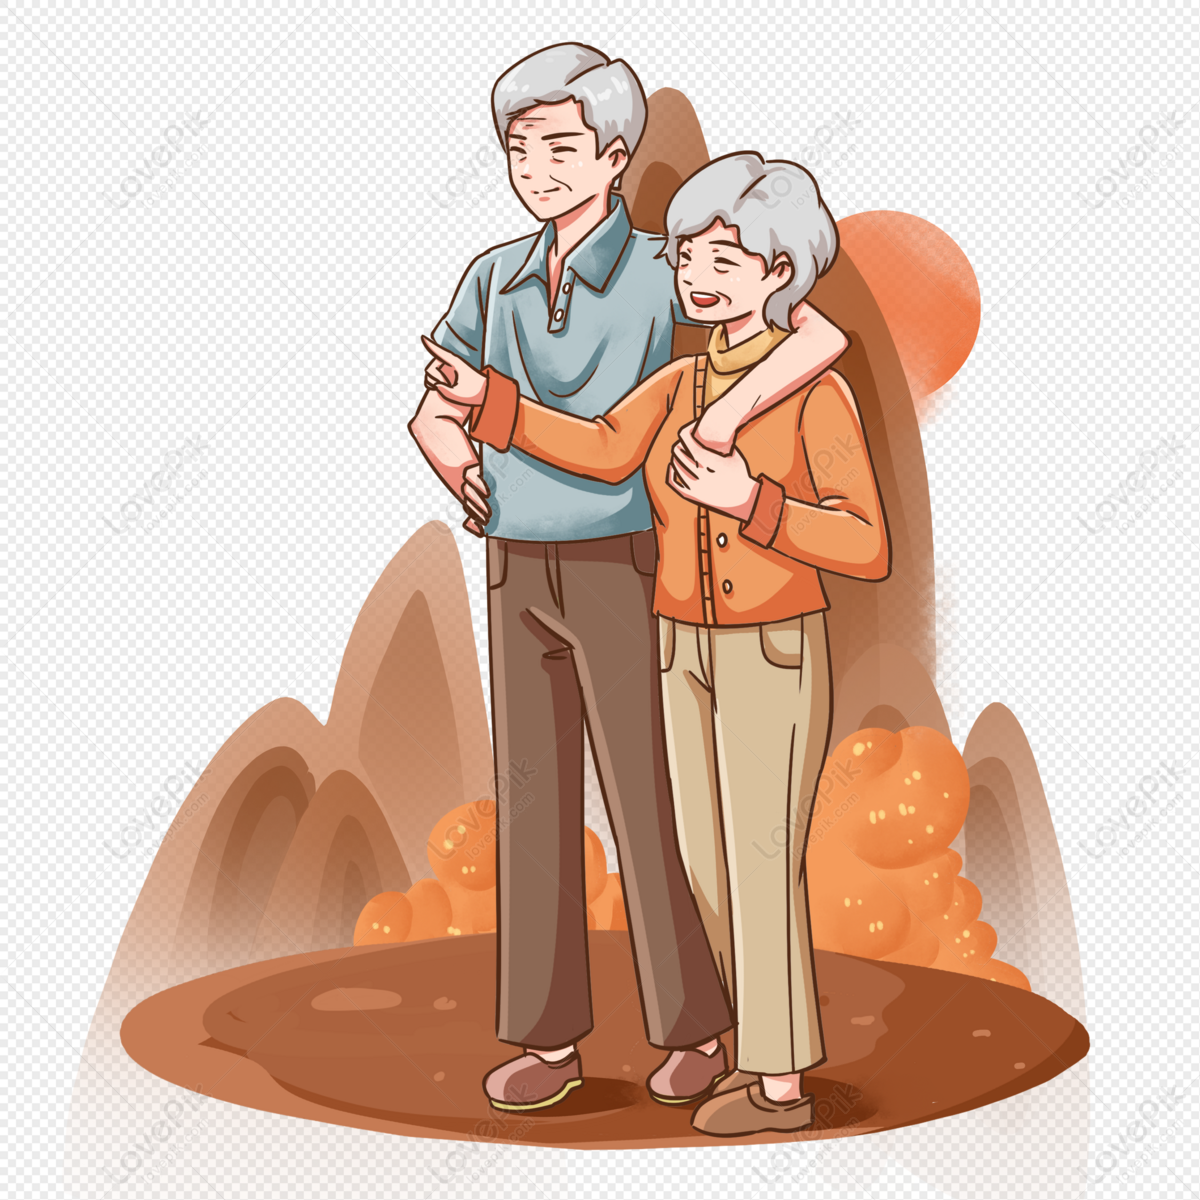 Old Couple Traveling PNG Transparent Background And Clipart Image For Free  Download - Lovepik | 401805260